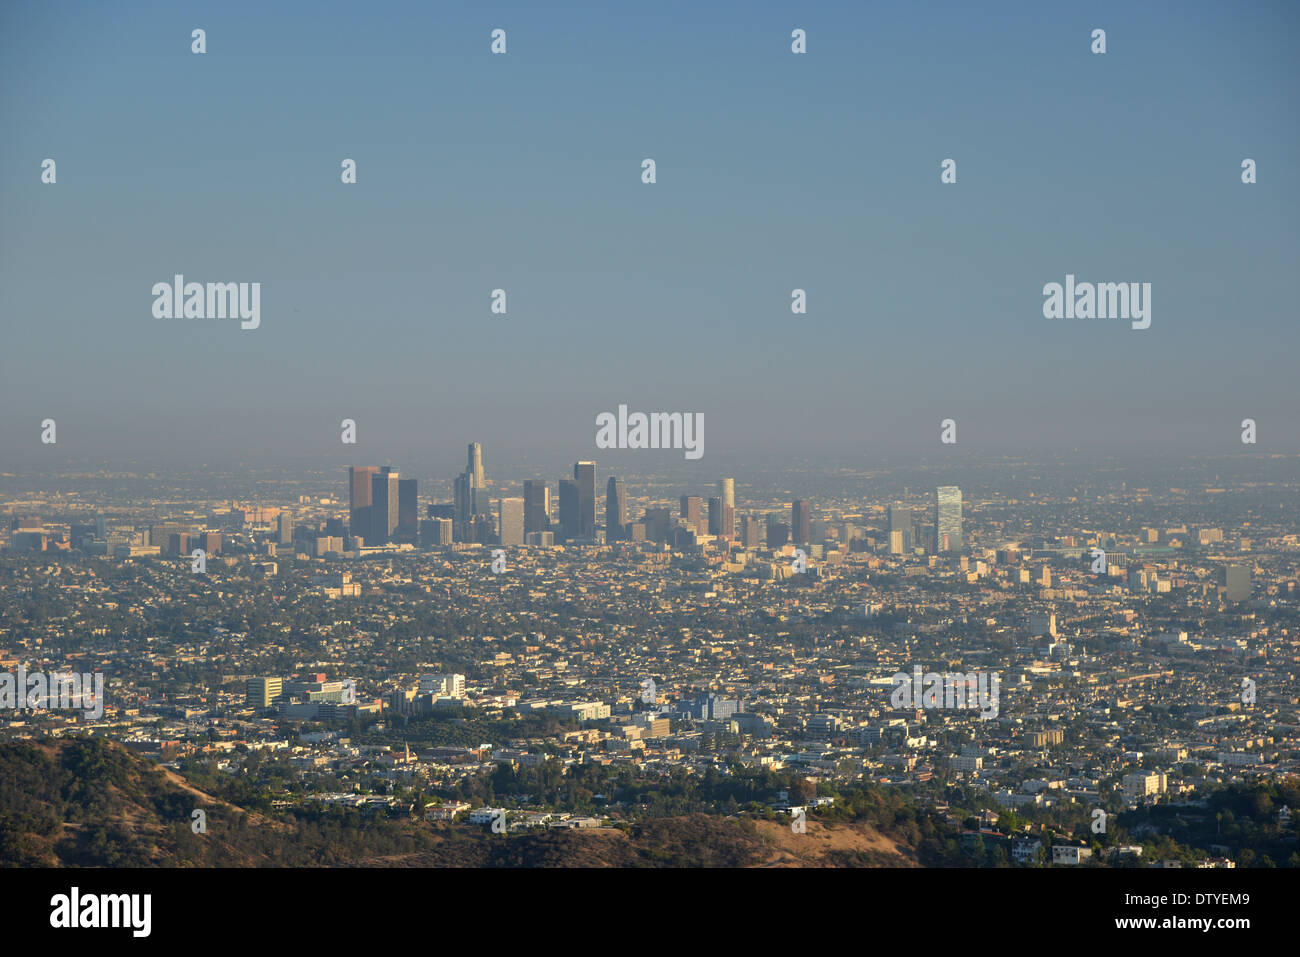 Downtown LA and its smog beneath a blue sky and heat shimmer seen from the Hollywood hills Stock Photo